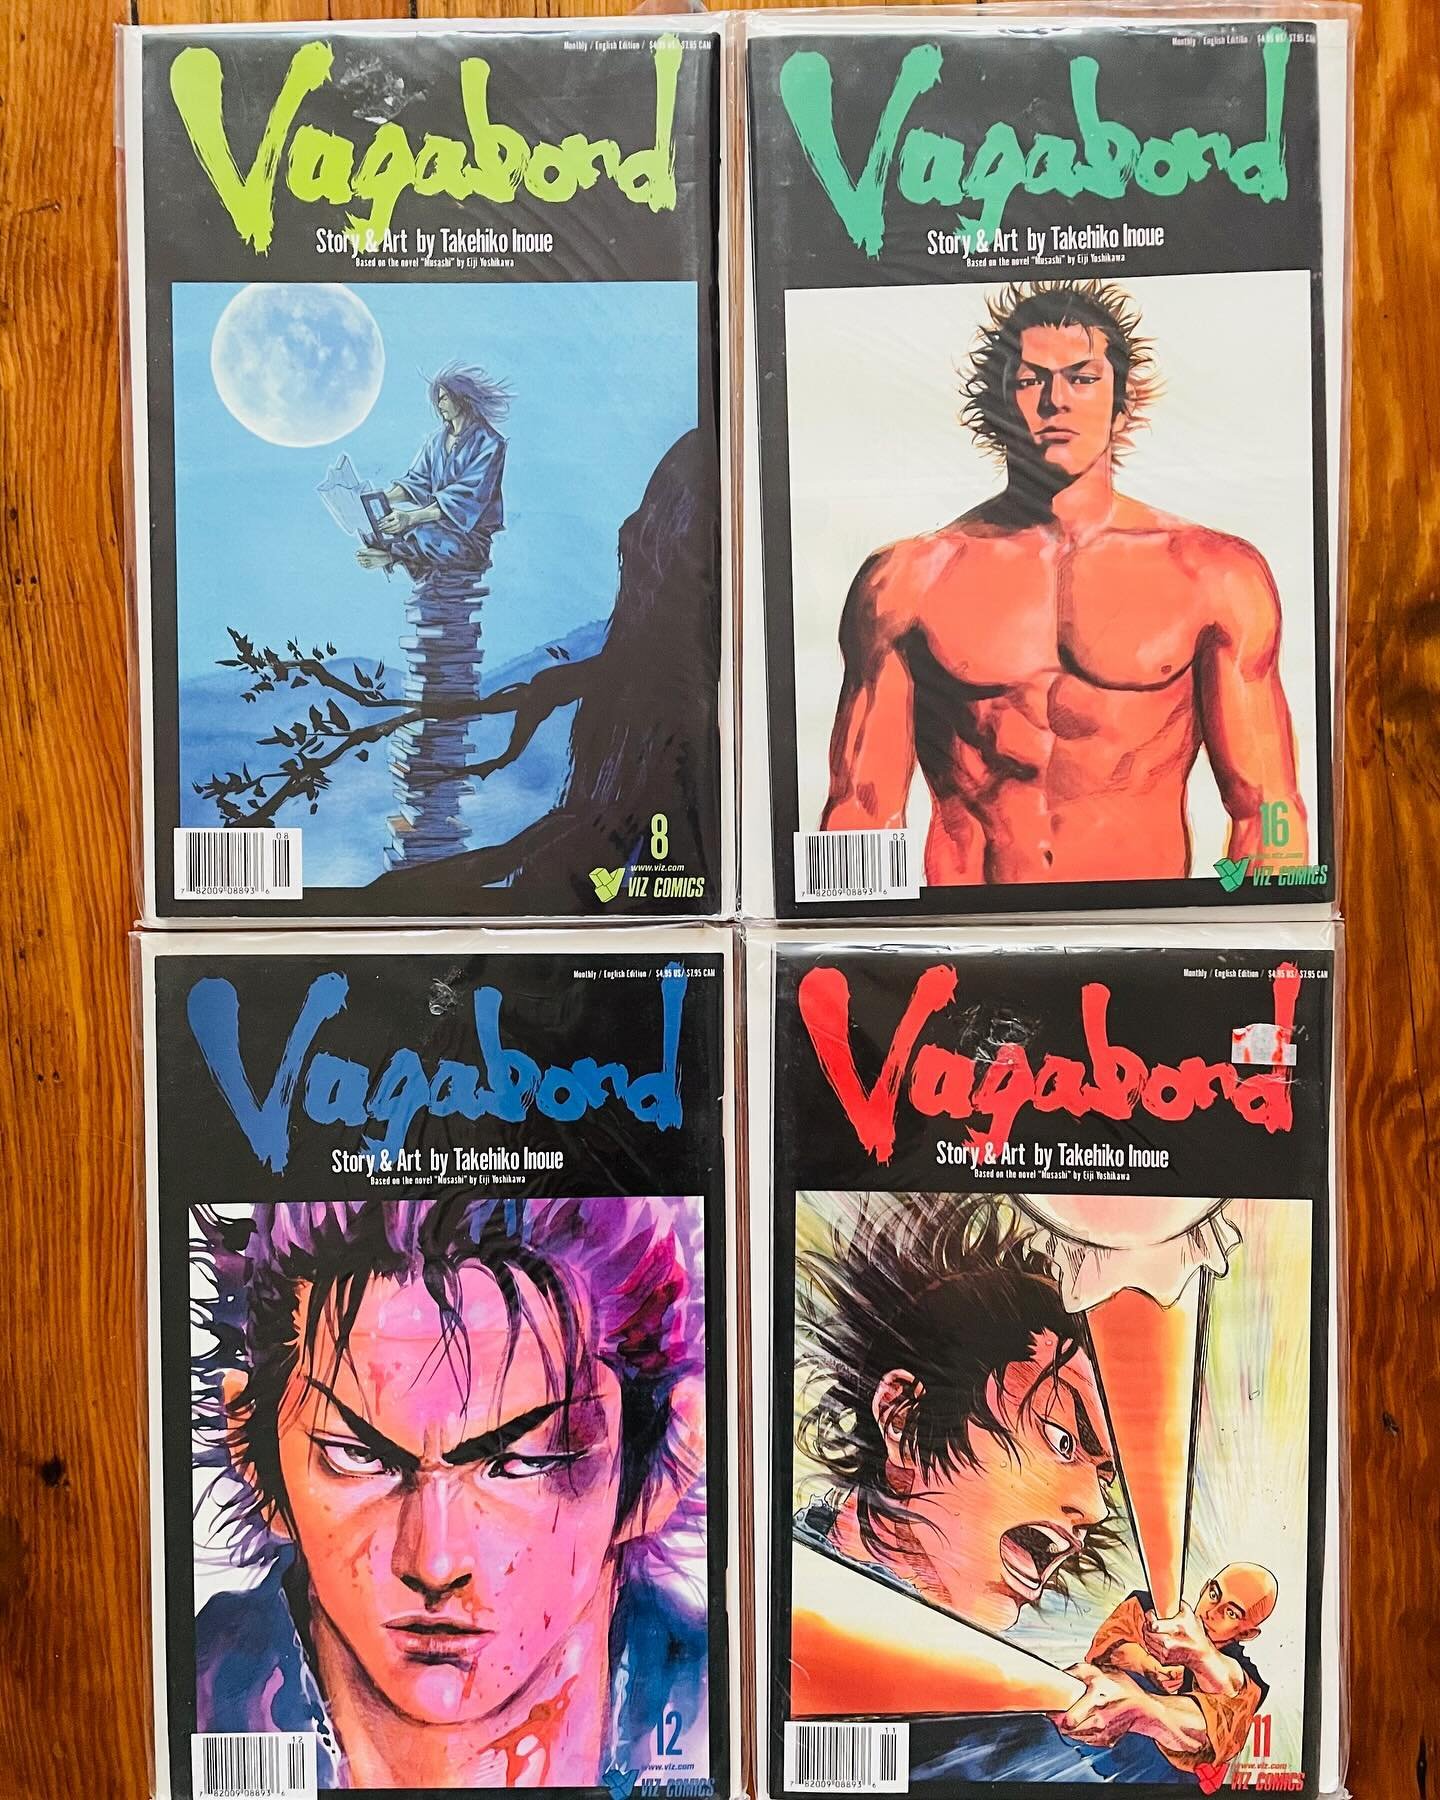 We hope you have the best weekend! New in stock - rare single issues of Vagabond!

 OPEN TODAY 11 AM - 7 PM🔥

Your new local Manga shop
NOW OPEN

mangacincinnati.com

Please visit our website for more info!

Manga Manga
5908 Hamilton Ave.
Cincinnati